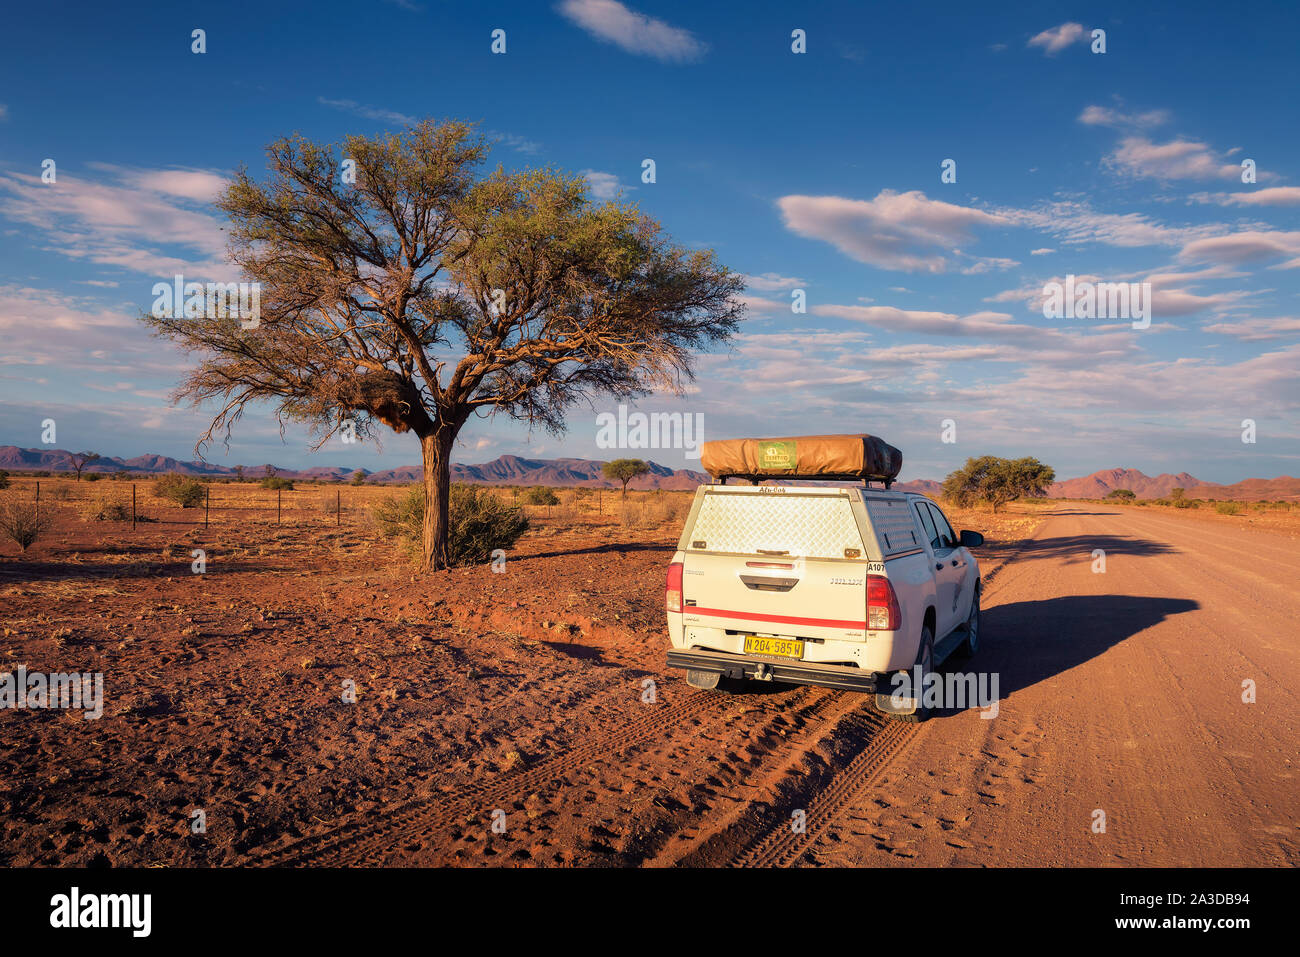 4x4 rental car equipped with a roof tent driving on a dirt road in Namibia Stock Photo